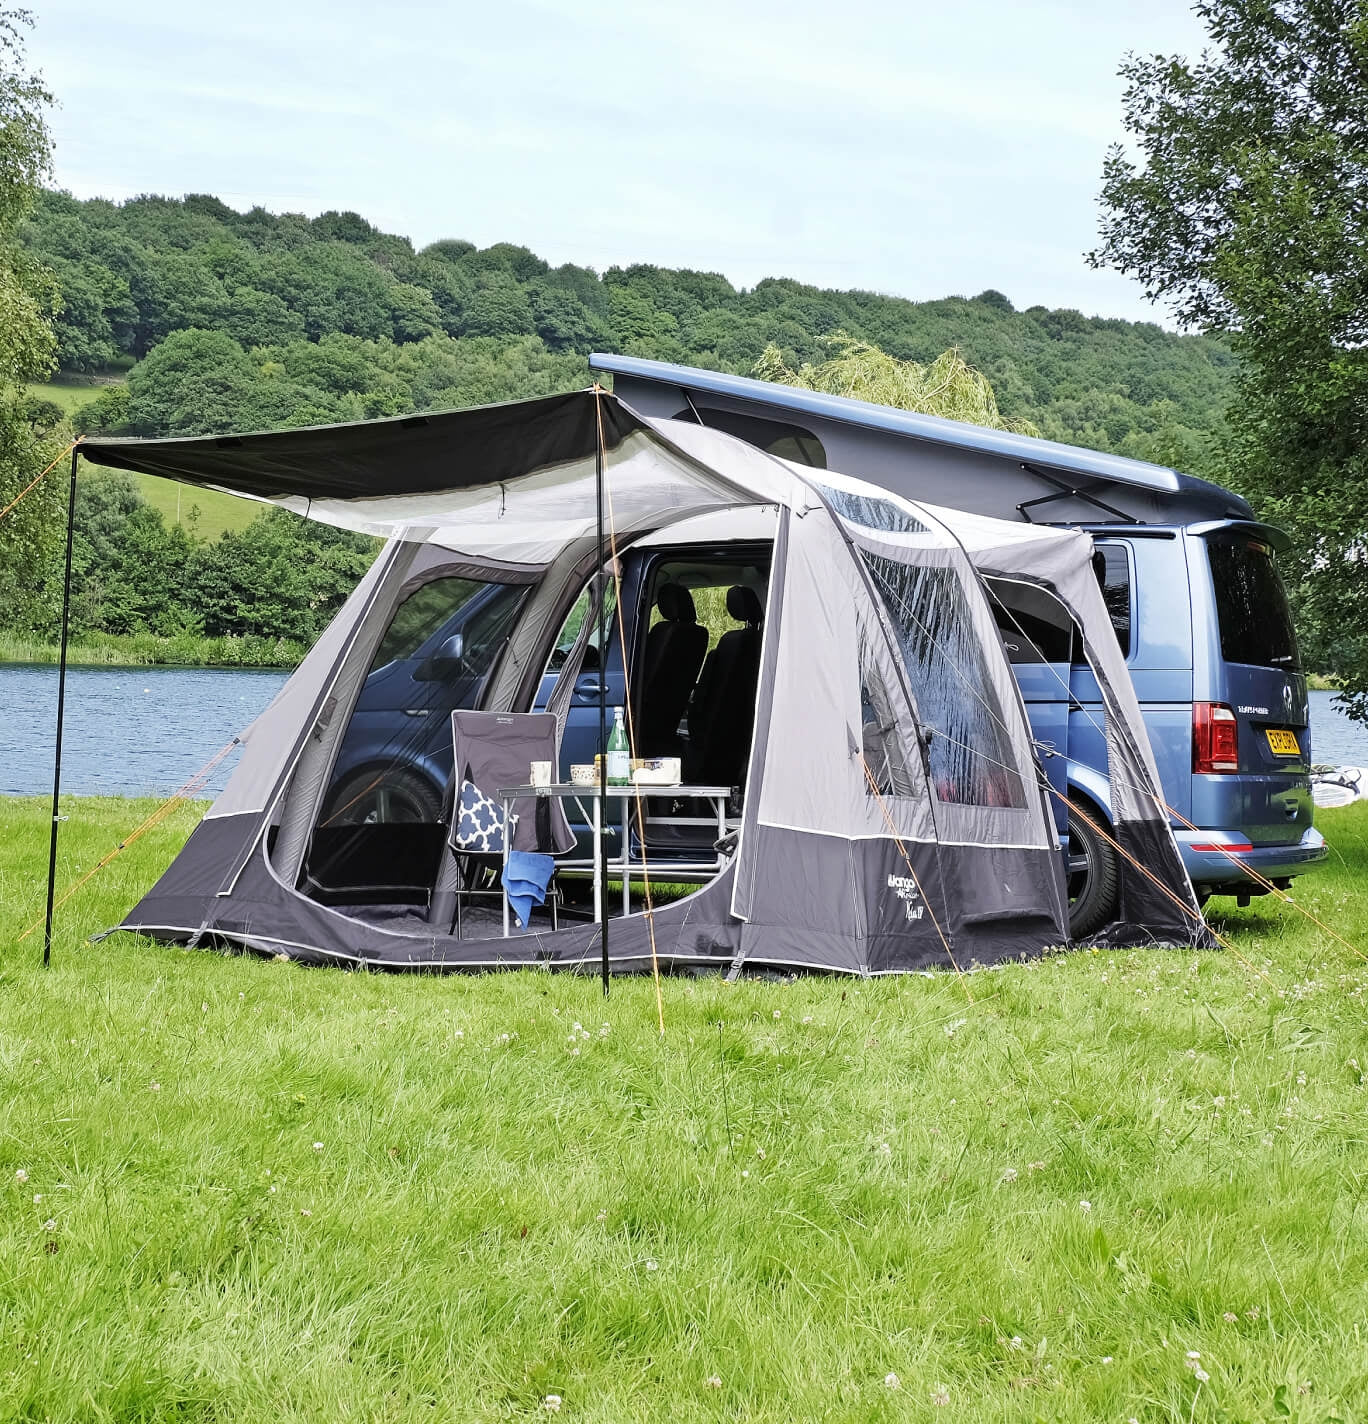 The Vango Kela with sun canopy and chairs pitched to a VW